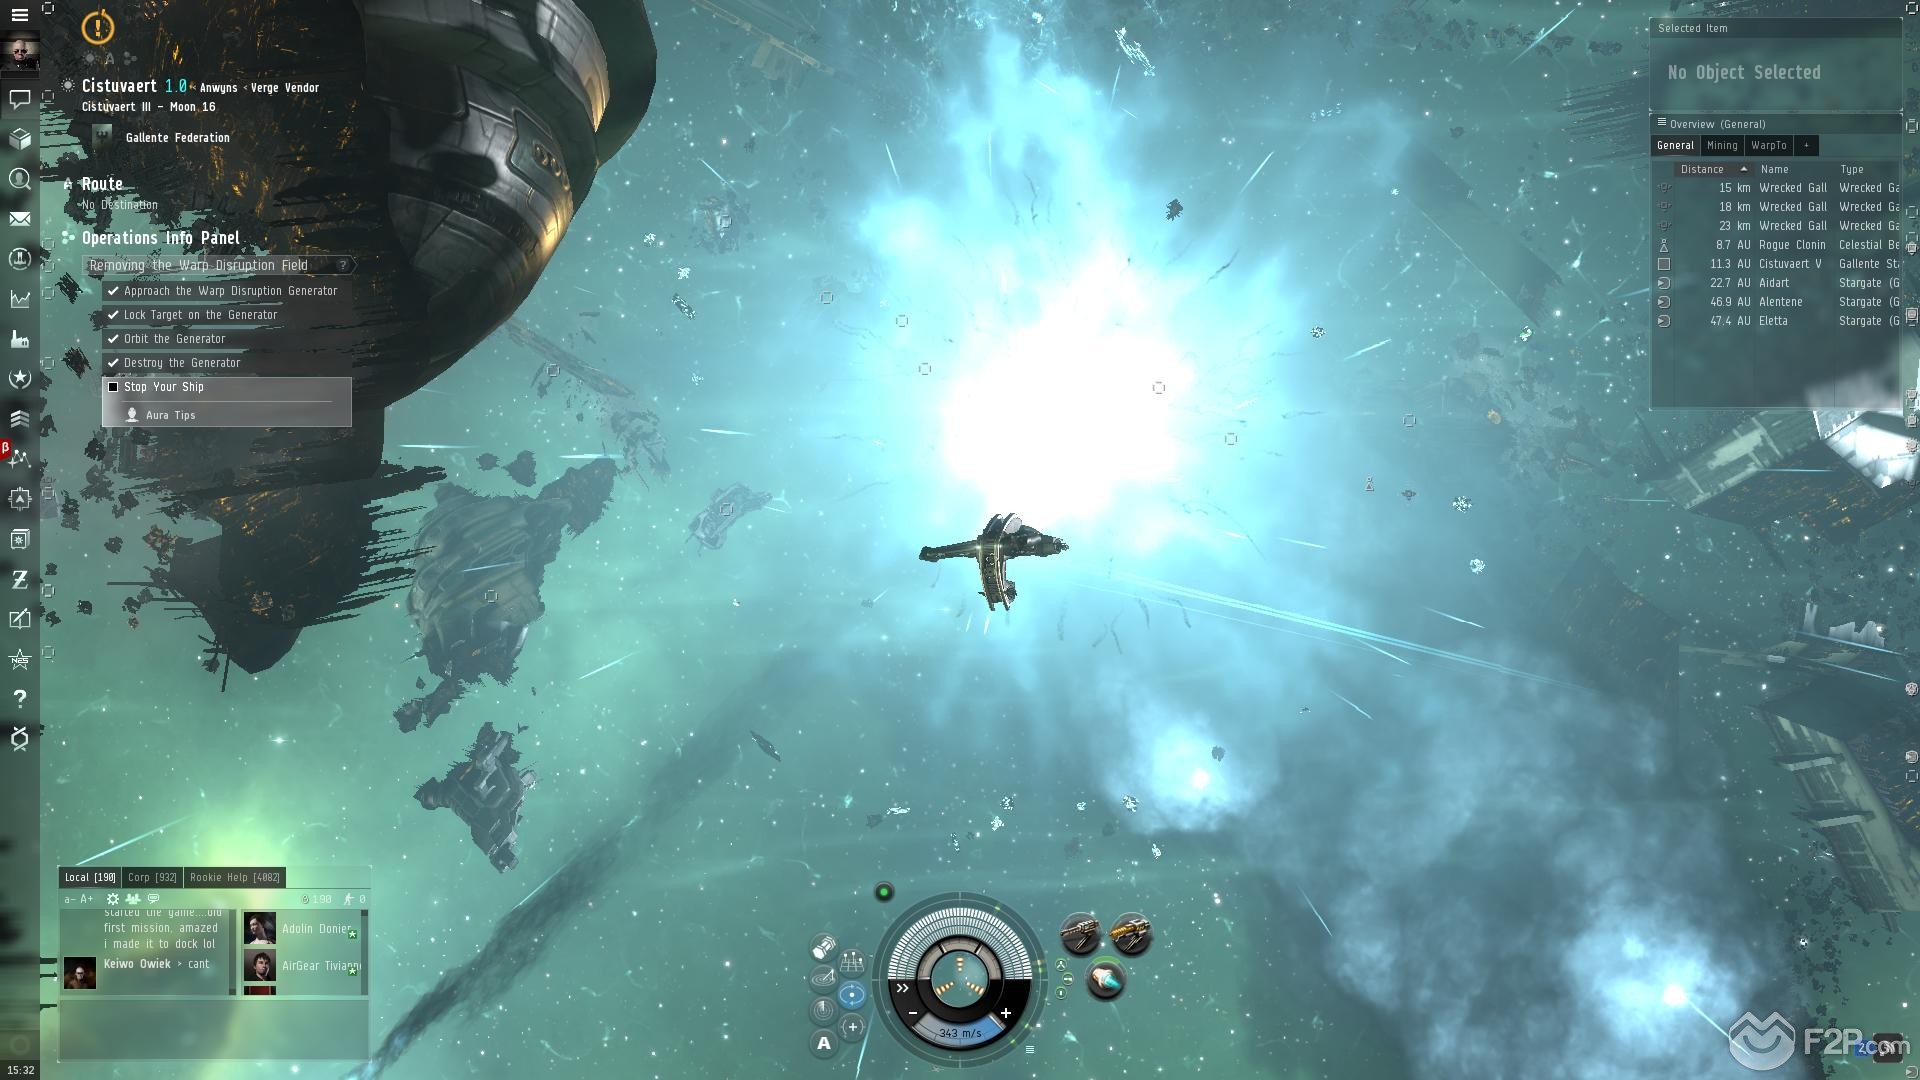 Eve Online Free2Play - Eve Online F2P Game, Eve Online Free-to-play